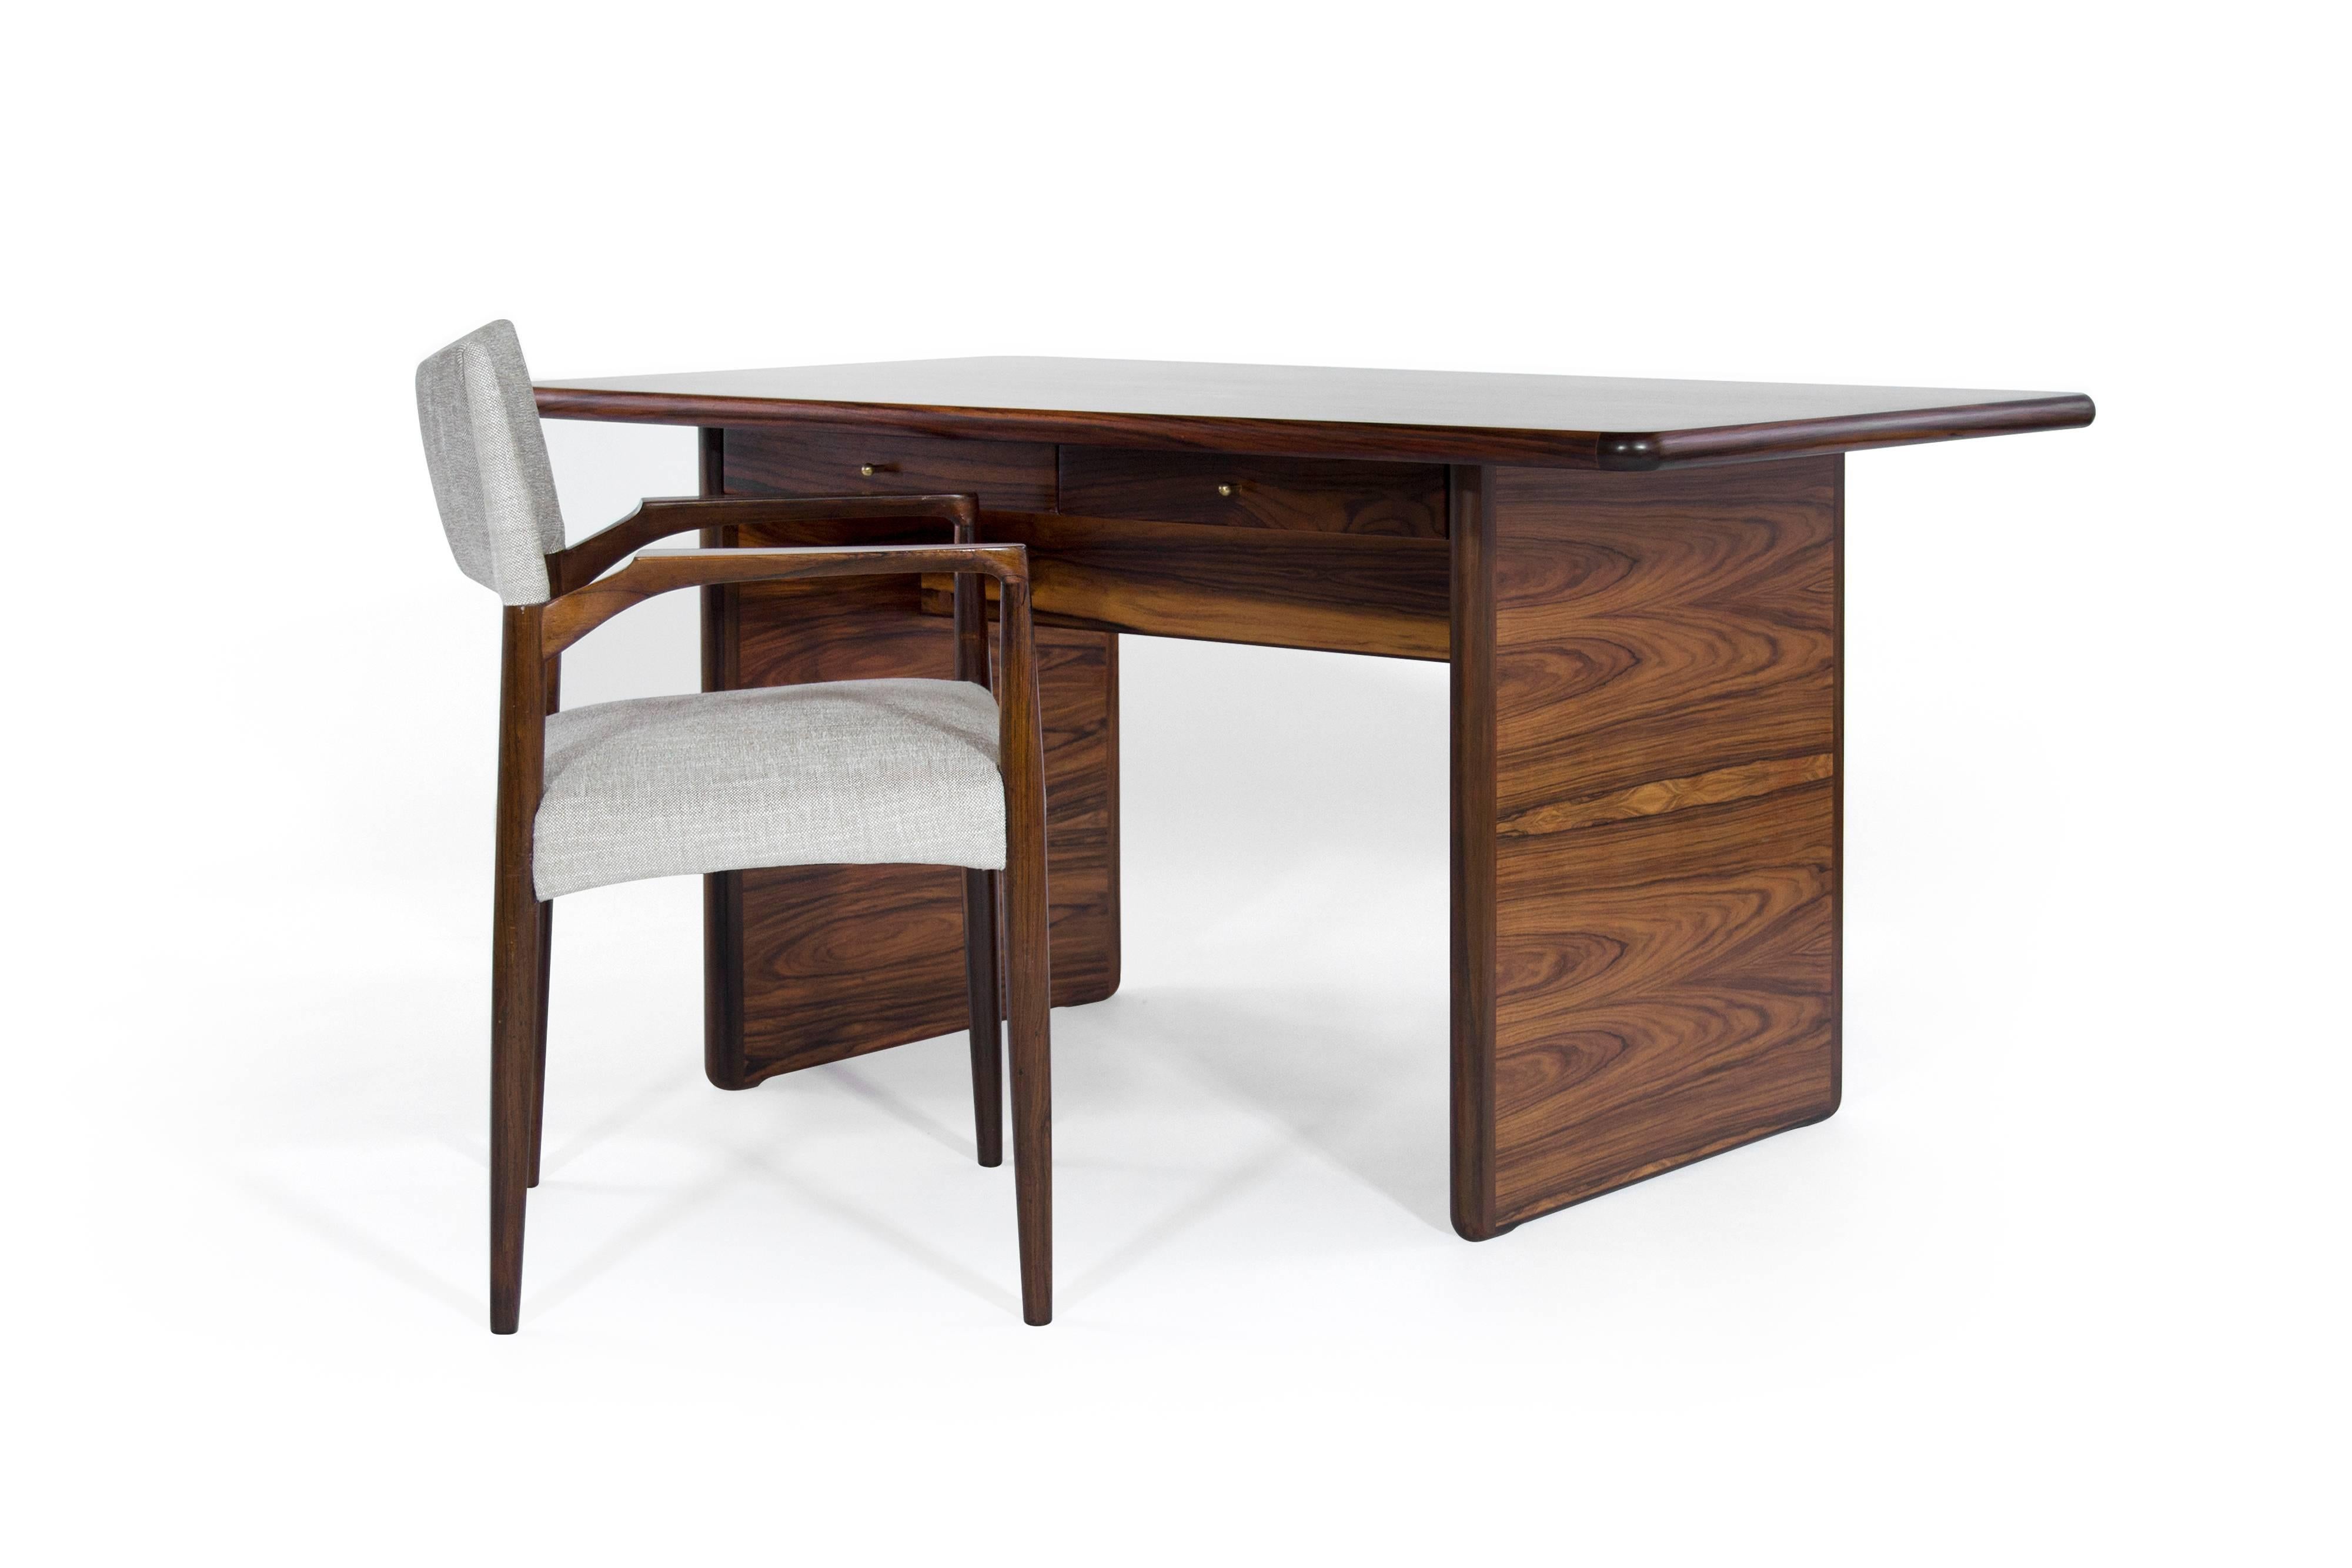 Gorgeous fully restored modern rosewood desk or writing table with twin drawers highlighted by brass pulls, Denmark 1960s.